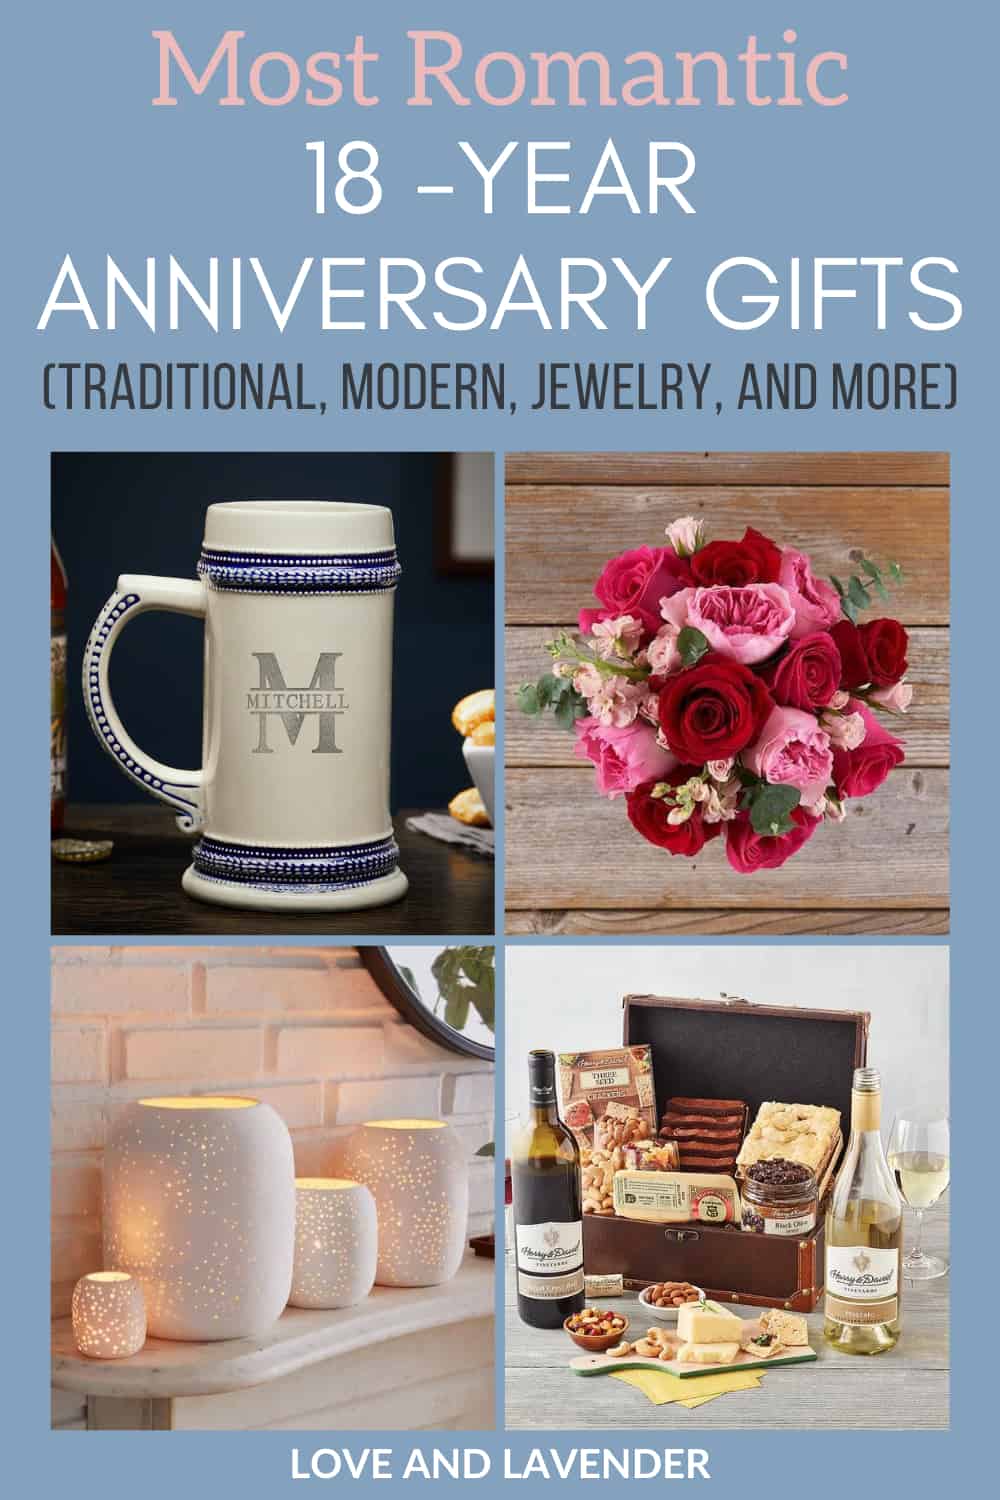 Pinterest pin - 23 Thoughtful 18th Anniversary Gift Ideas